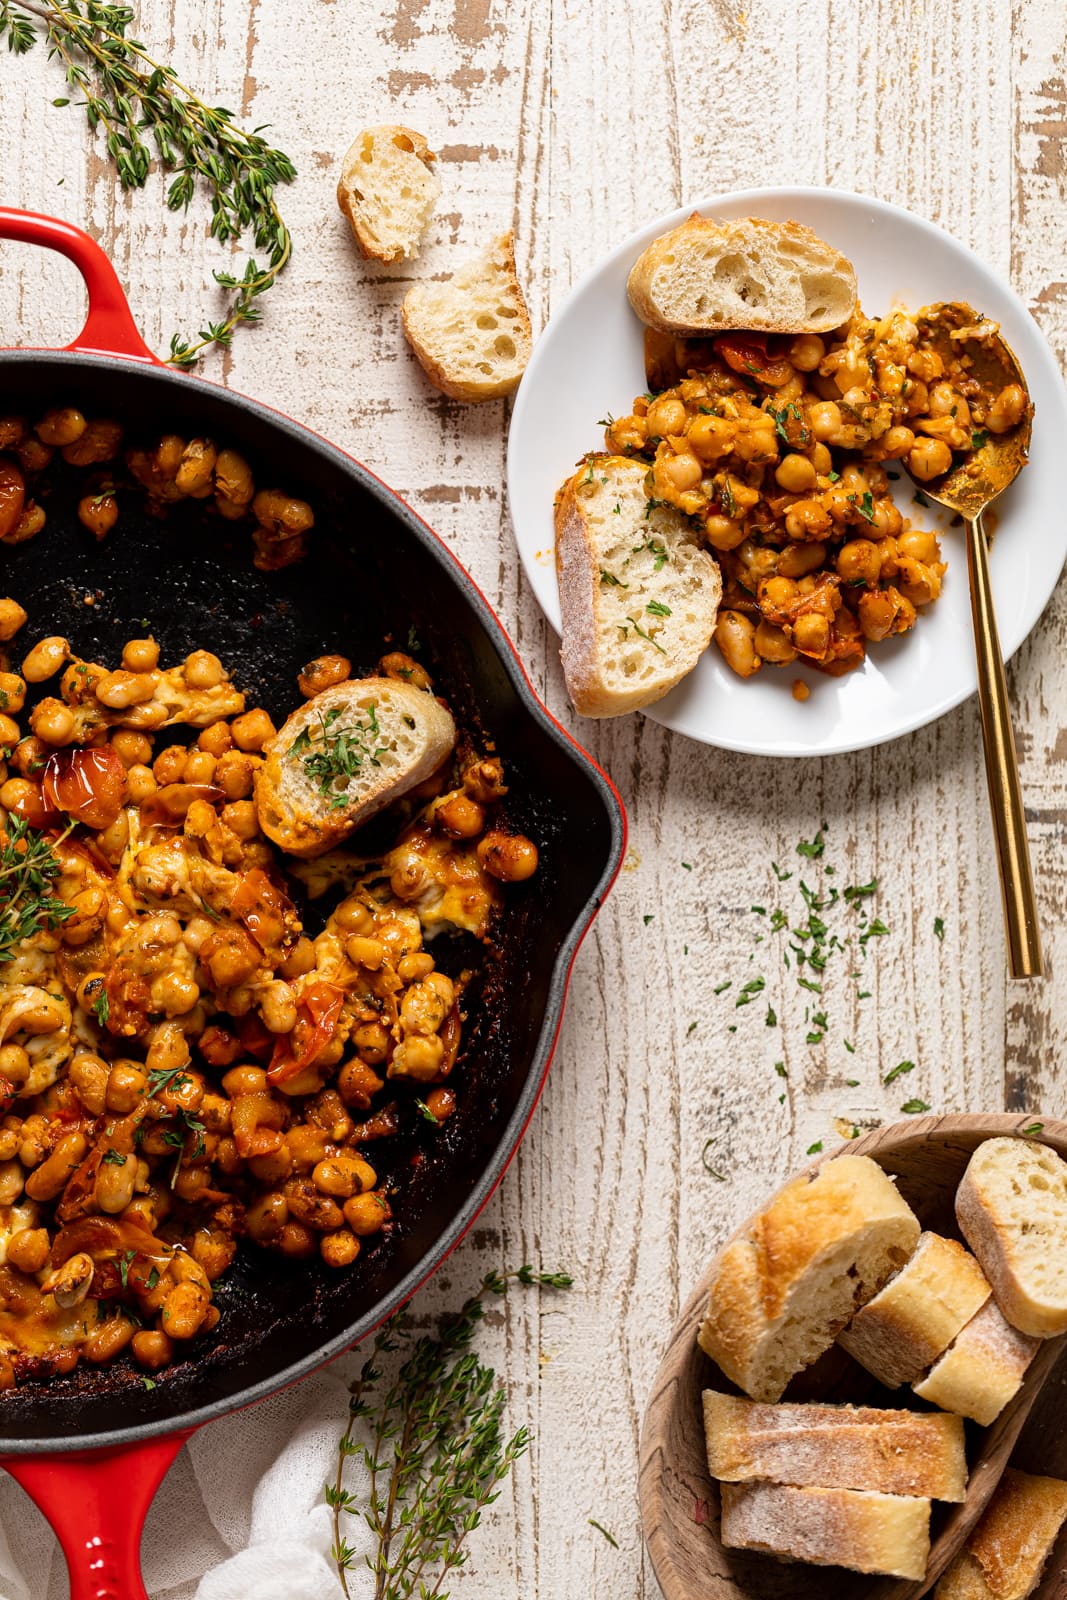 Plate and skillet of Saucy Baked Chickpea and White Beans